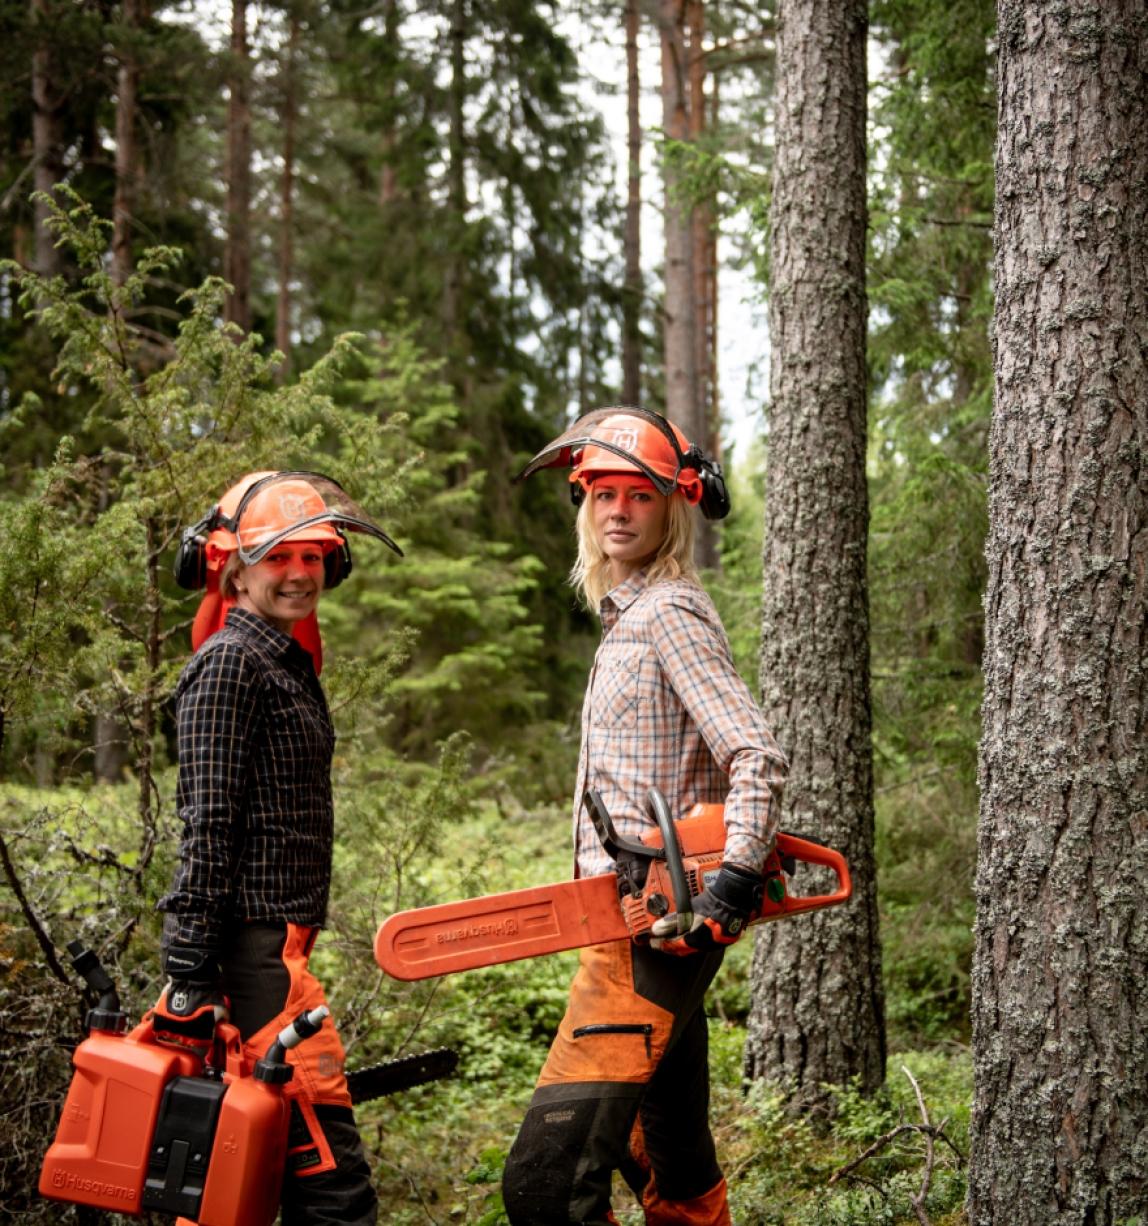 Two women standing in a forest with hardhats and chainsaws